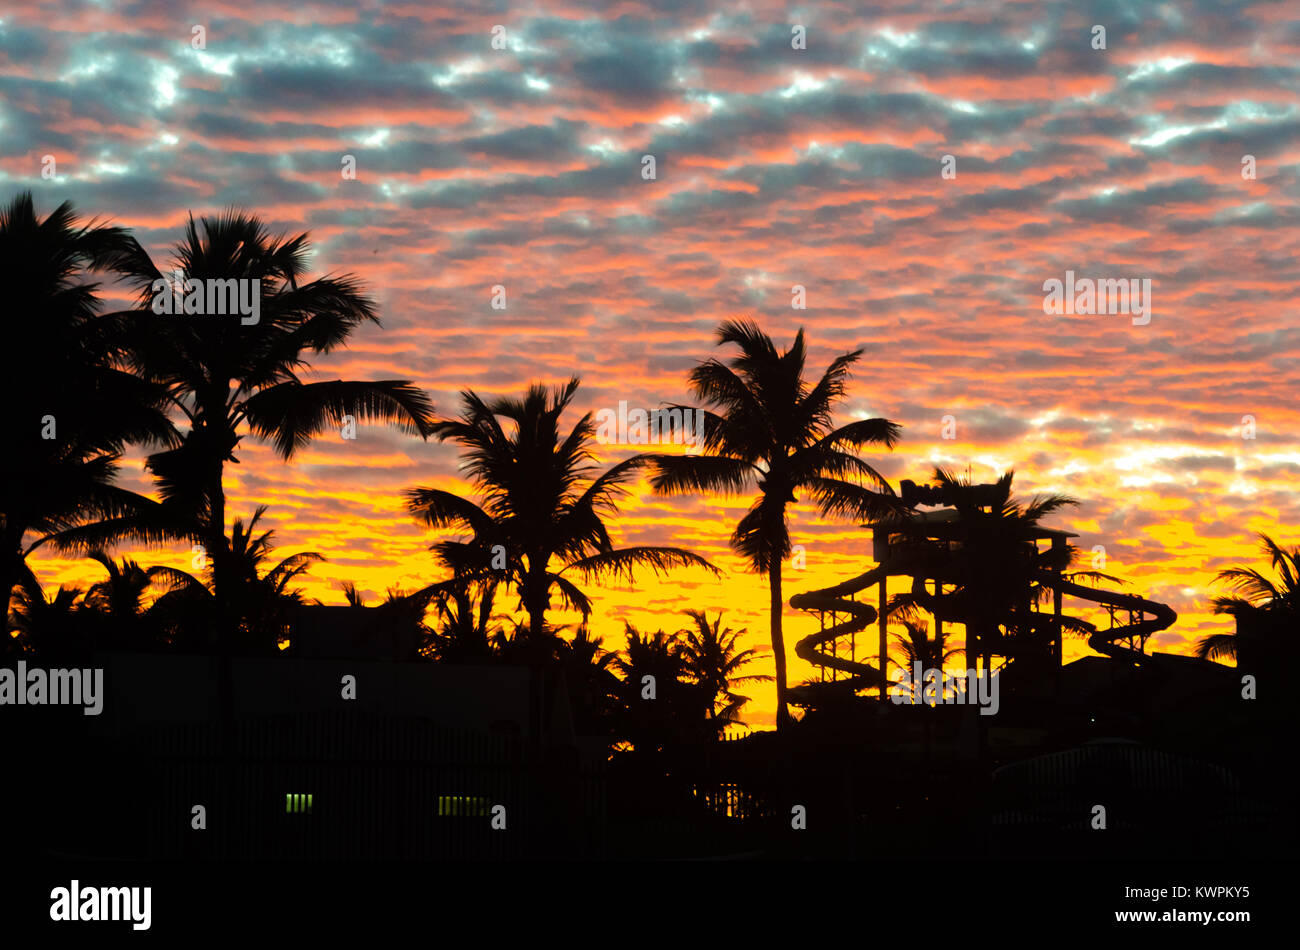 Sunset golden hour with colored sky and palm trees as background Stock Photo